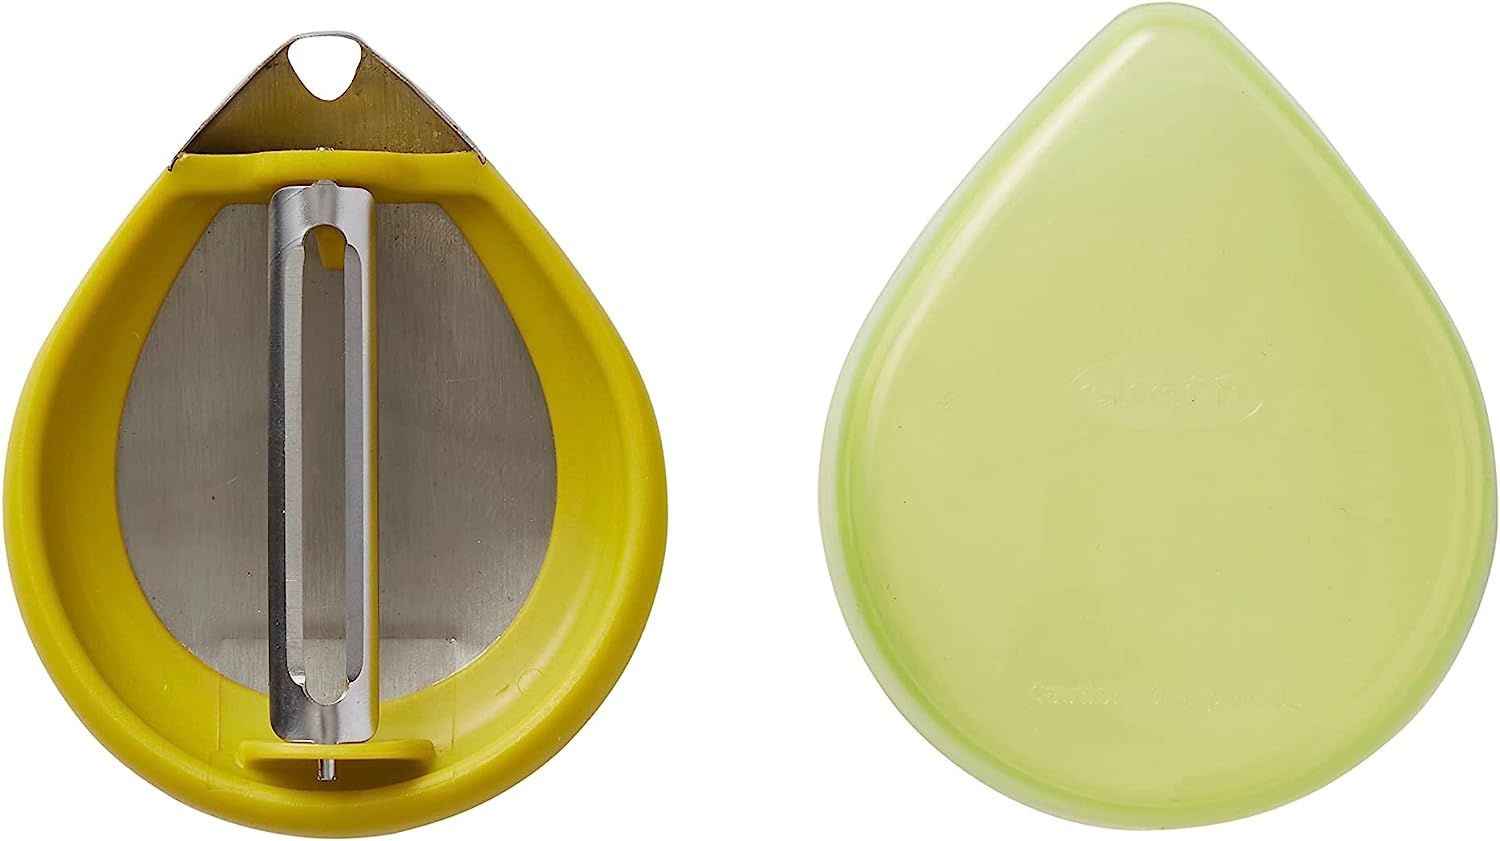 A top down view of the PalmPeeler Vegetable Peeler with its protective case.